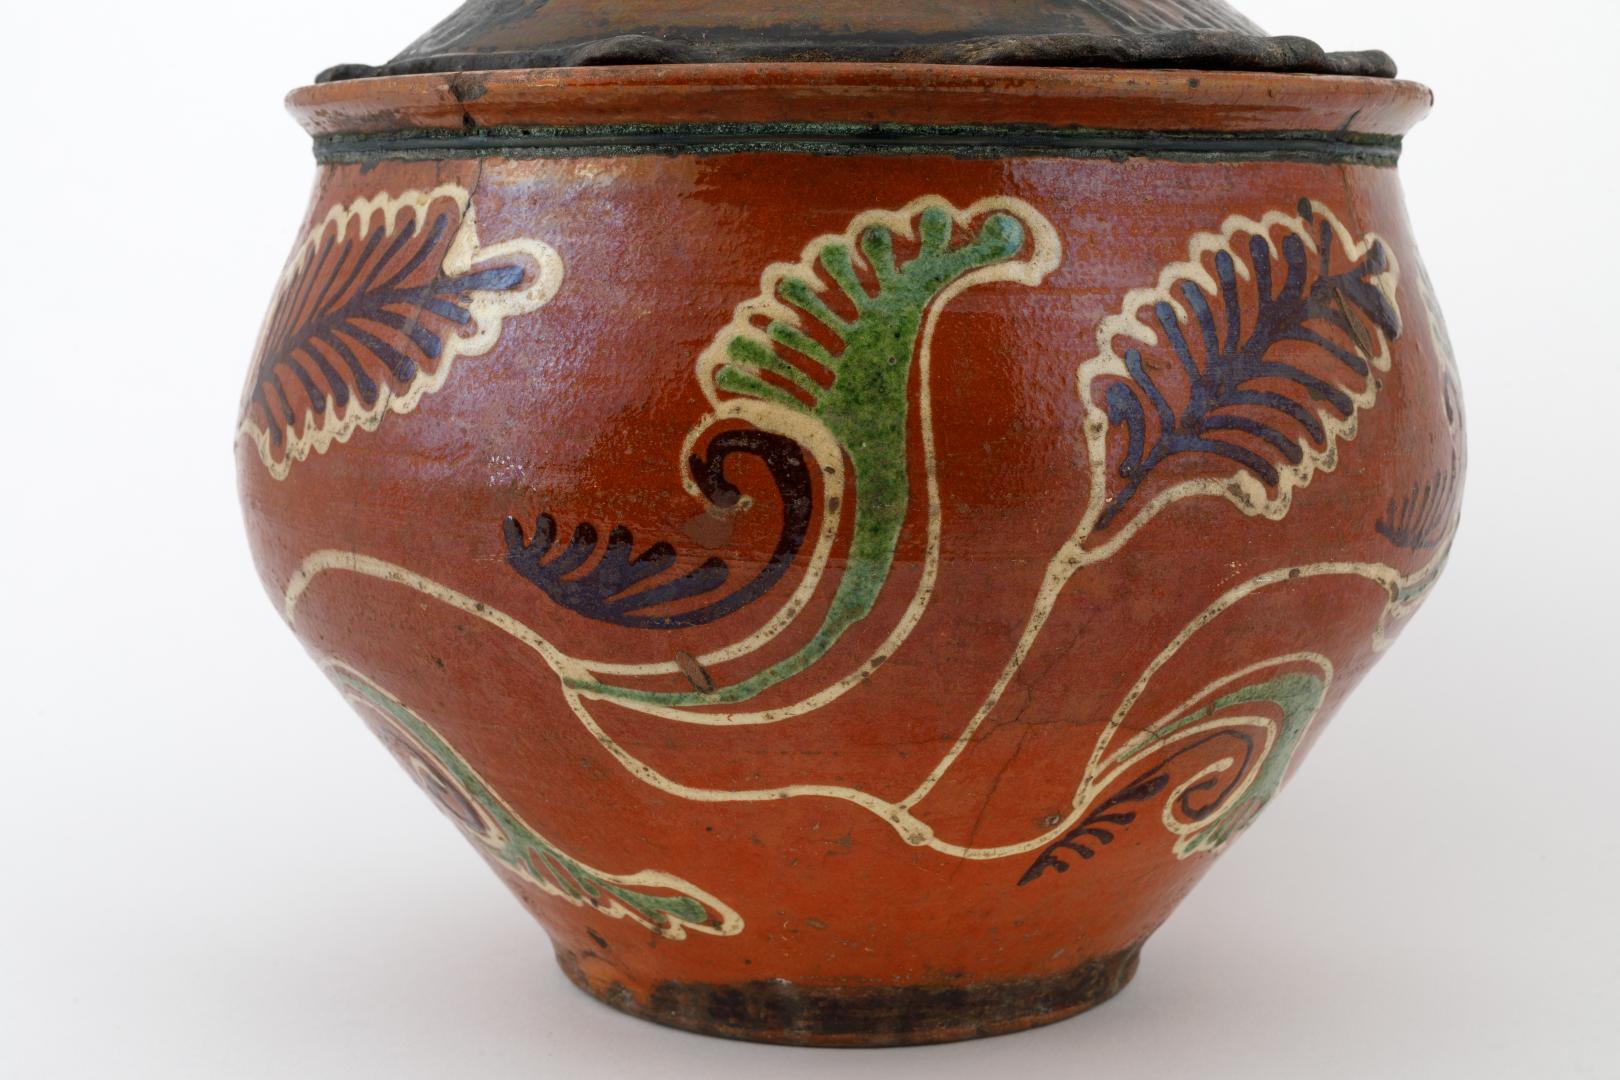 Makitra (bowl) with a lid